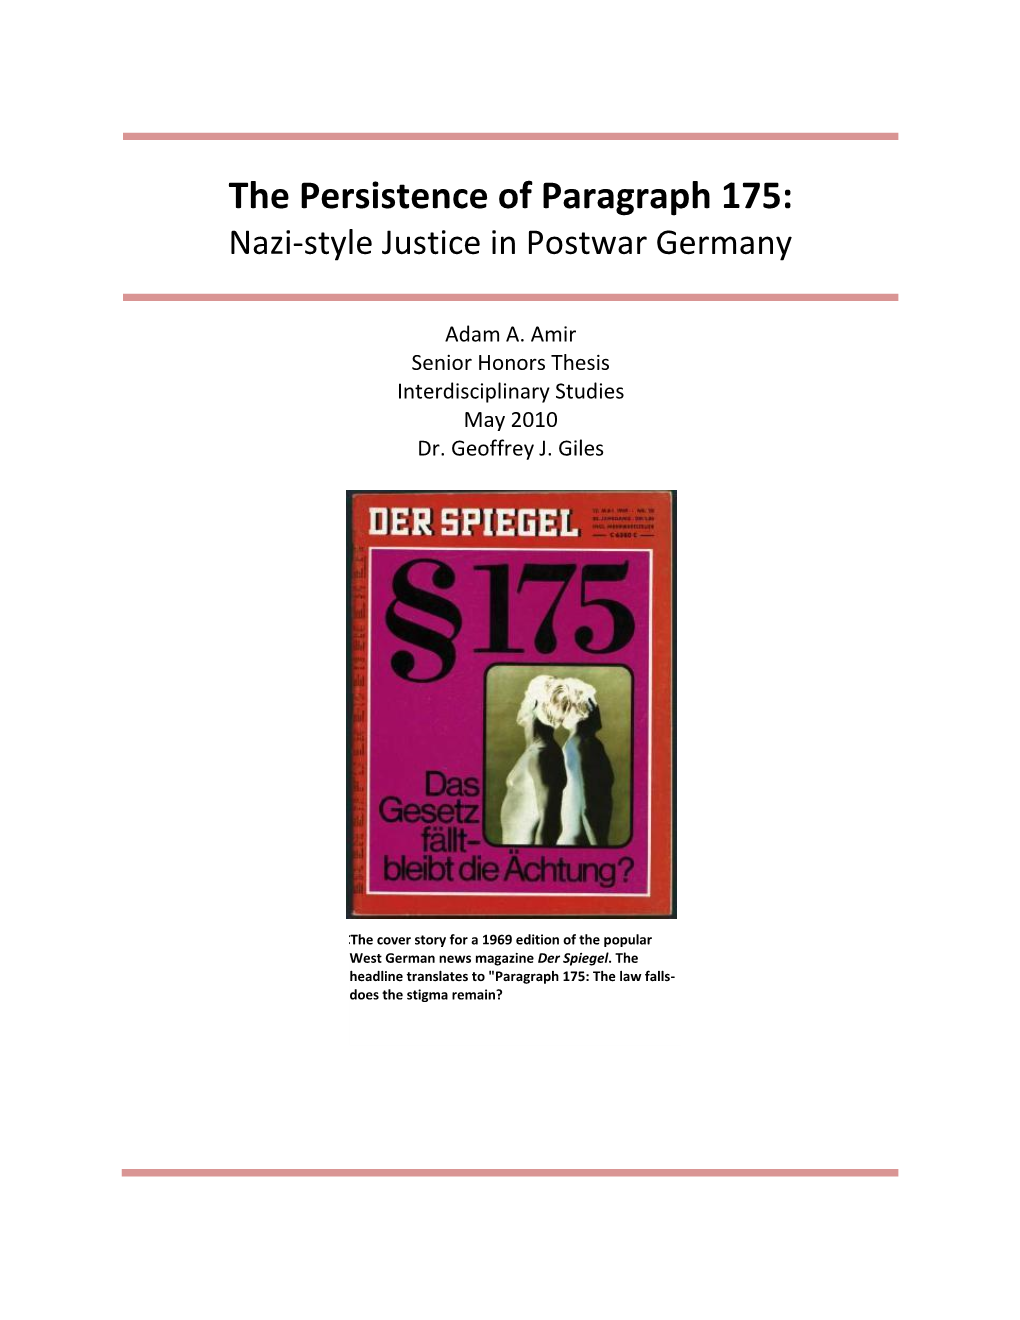 The Persistence of Paragraph 175: Nazi-Style Justice in Postwar Germany